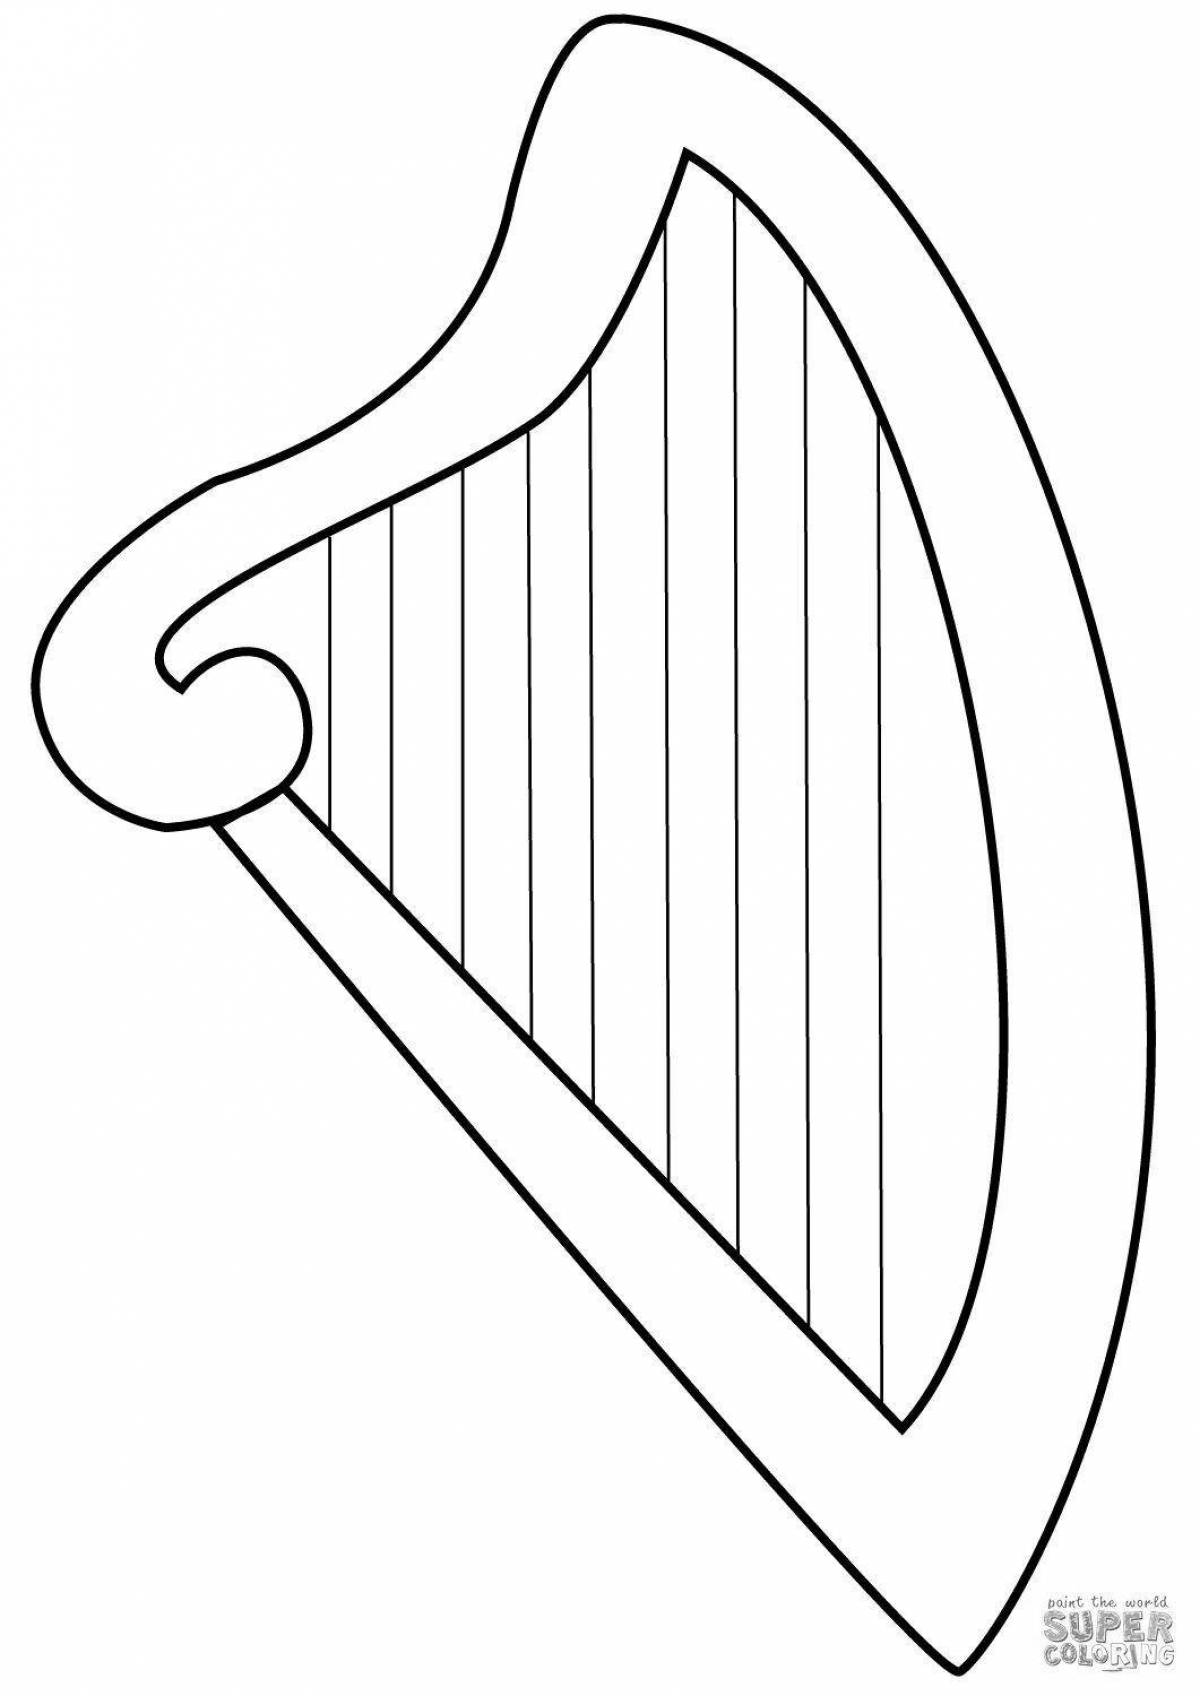 Awesome drawing of a harp